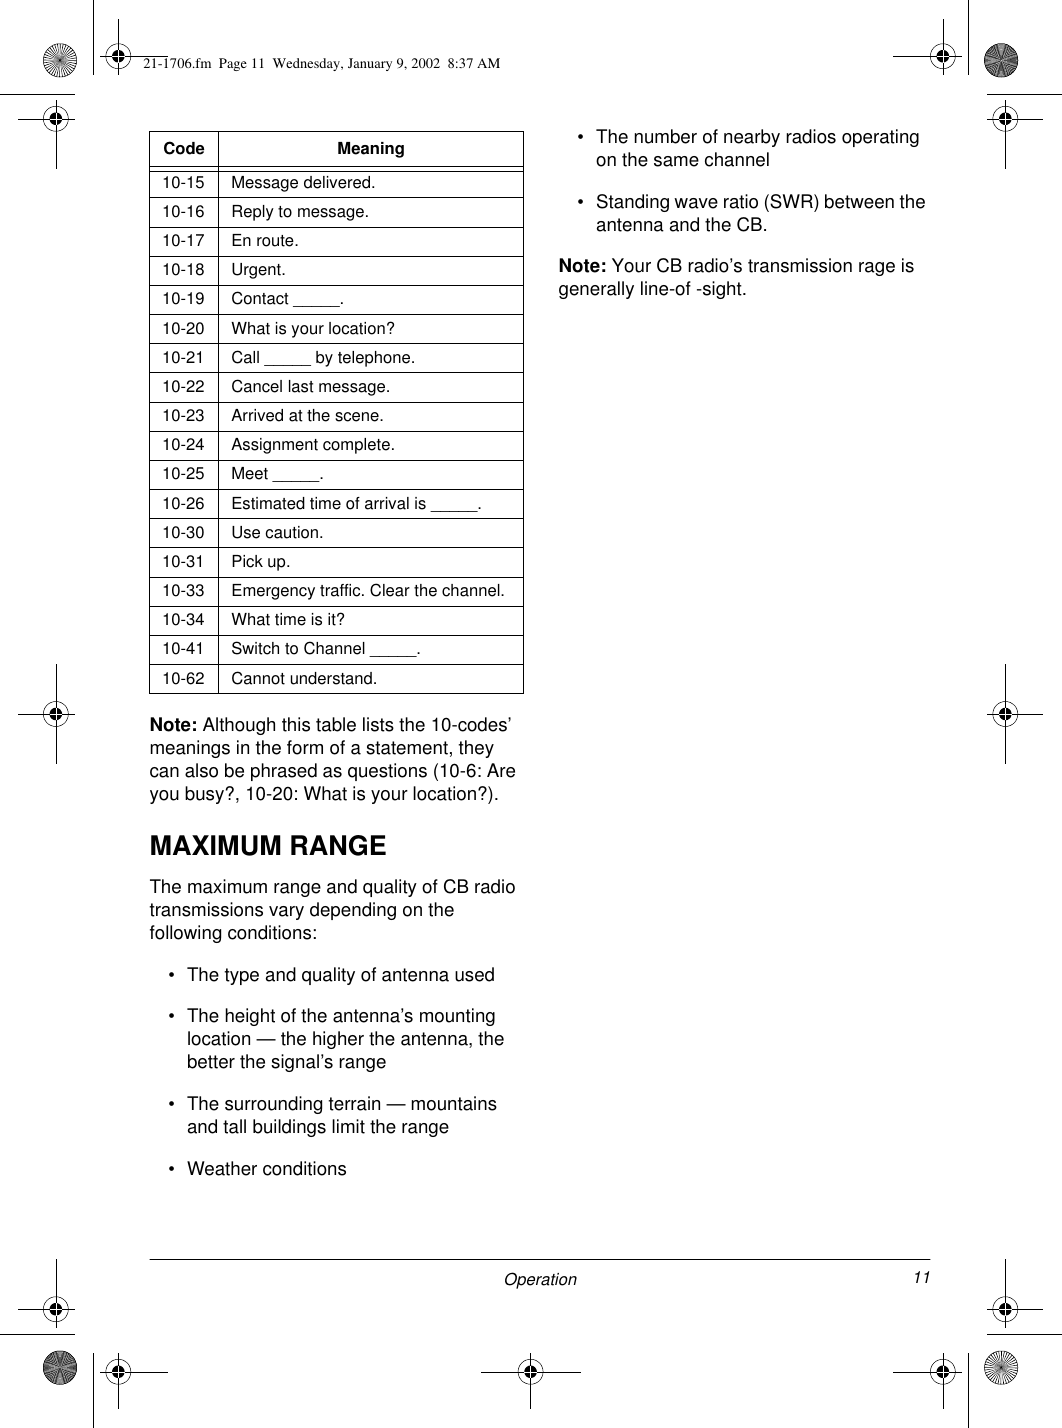 11OperationNote: Although this table lists the 10-codes’ meanings in the form of a statement, they can also be phrased as questions (10-6: Are you busy?, 10-20: What is your location?). MAXIMUM RANGEThe maximum range and quality of CB radio transmissions vary depending on the following conditions:• The type and quality of antenna used• The height of the antenna’s mounting location — the higher the antenna, the better the signal’s range• The surrounding terrain — mountains and tall buildings limit the range• Weather conditions• The number of nearby radios operating on the same channel• Standing wave ratio (SWR) between the antenna and the CB.Note: Your CB radio’s transmission rage is generally line-of -sight.10-15 Message delivered.10-16 Reply to message.10-17 En route.10-18 Urgent.10-19 Contact _____. 10-20 What is your location?10-21 Call _____ by telephone.10-22 Cancel last message.10-23 Arrived at the scene.10-24 Assignment complete.10-25 Meet _____.10-26 Estimated time of arrival is _____.10-30 Use caution.10-31 Pick up.10-33 Emergency traffic. Clear the channel.10-34 What time is it?10-41 Switch to Channel _____.10-62 Cannot understand.Code Meaning21-1706.fm  Page 11  Wednesday, January 9, 2002  8:37 AM